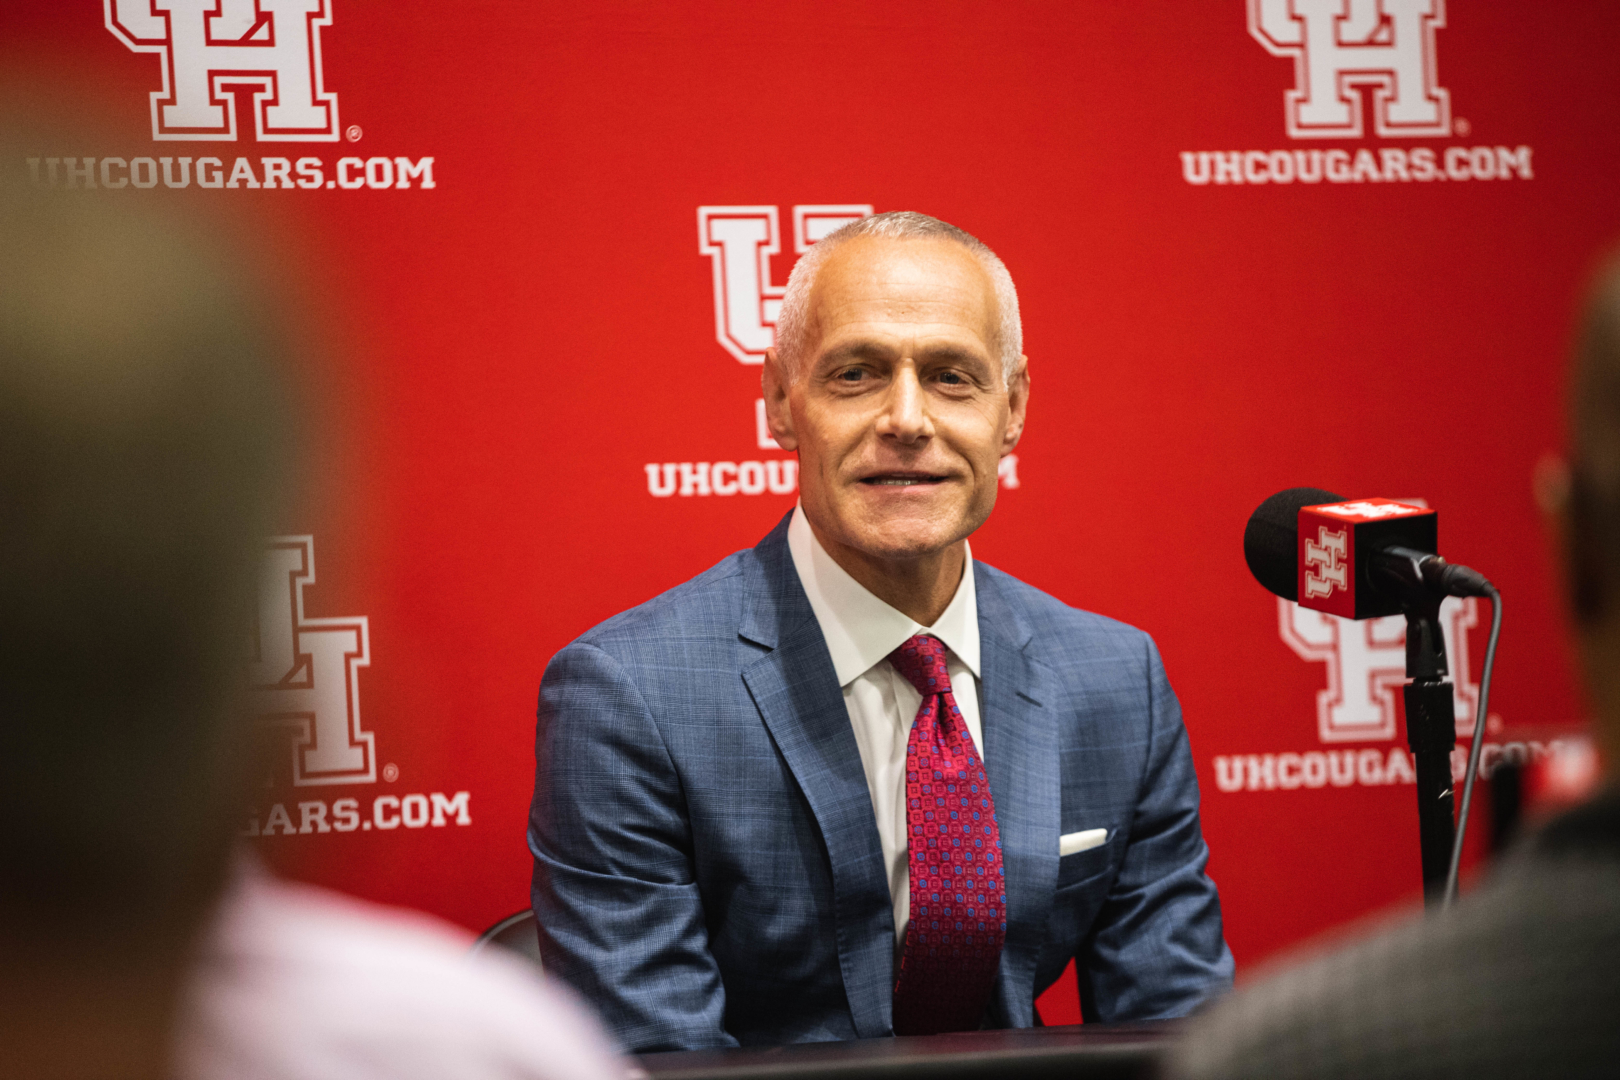 New Big 12 commissioner Brett Yormark met with the media on Monday morning as part of his campus visit to UH. | James Schillinger/The Cougar